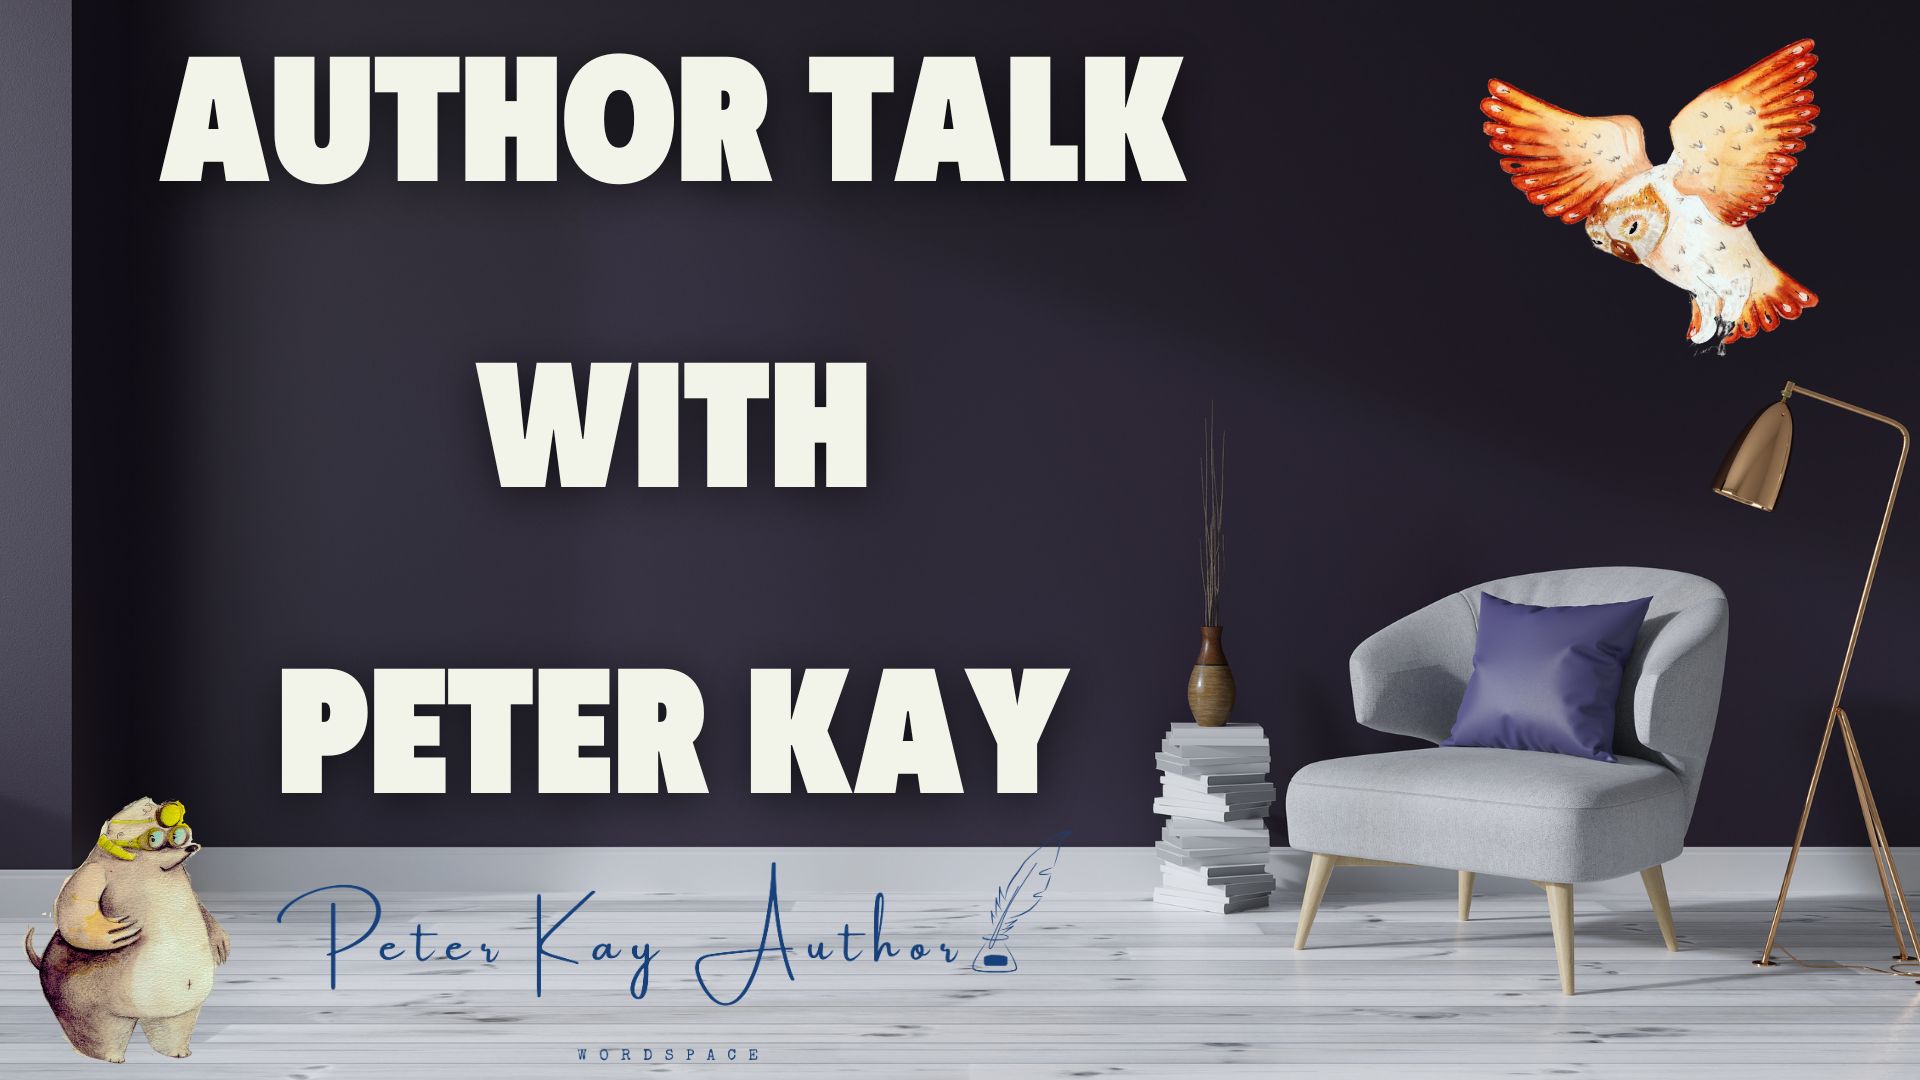 Author talk with Peter Kay (All about his new book, meet & greet & where to buy)